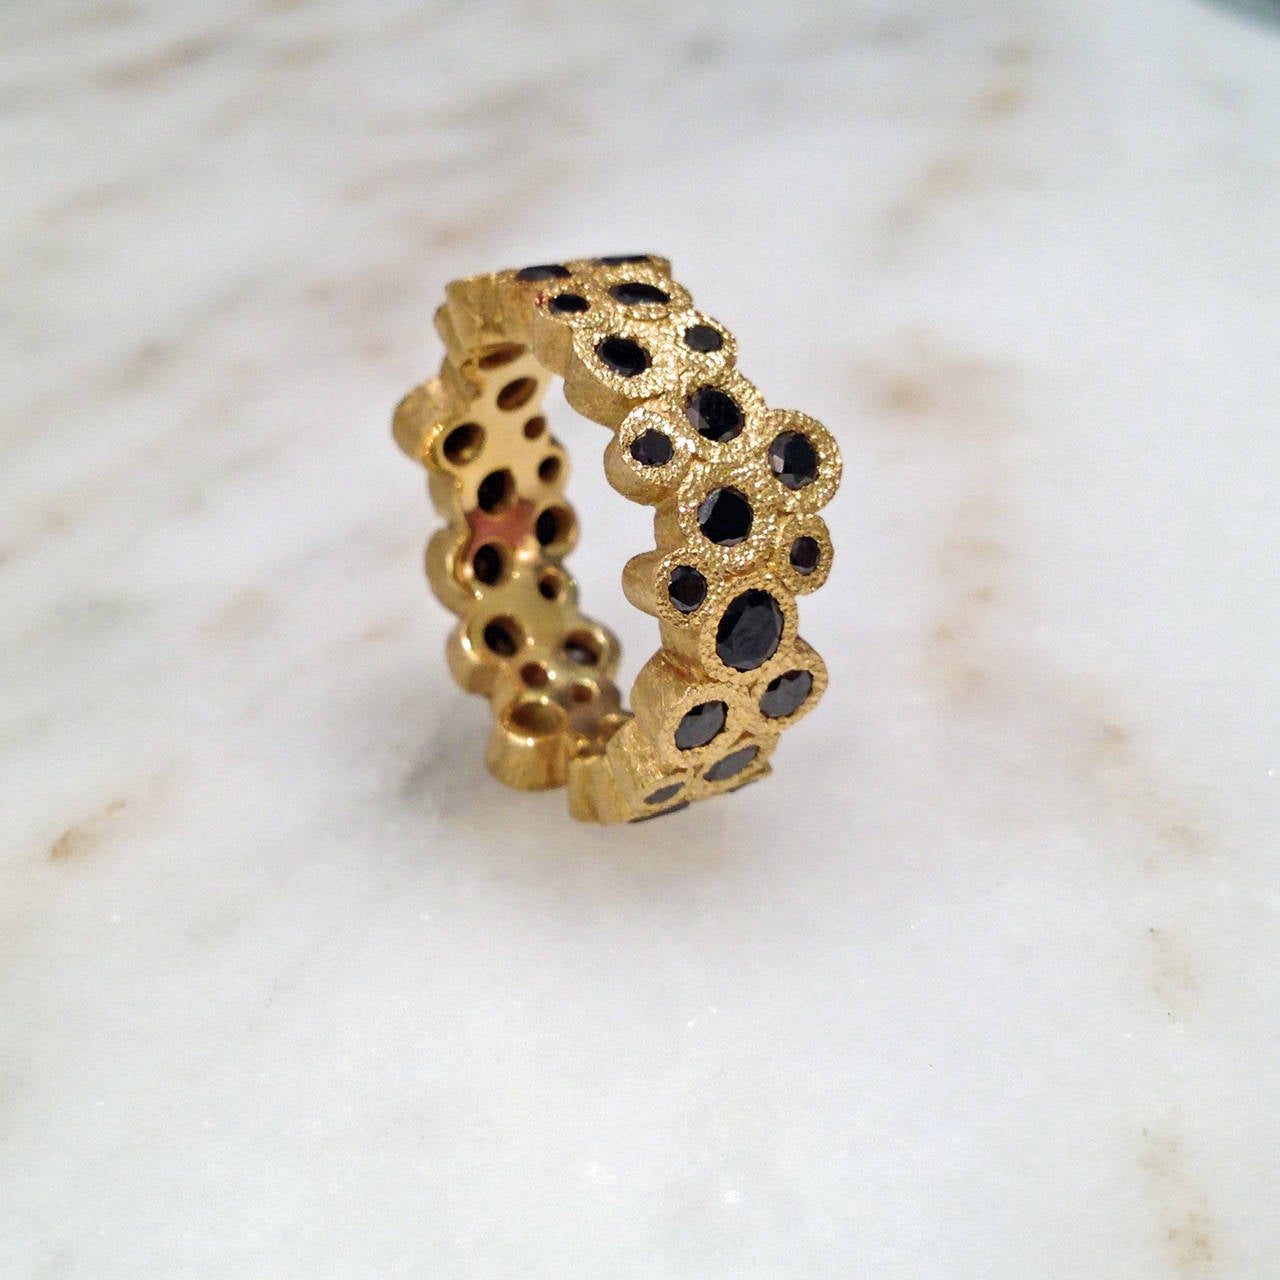 One-of-a-Kind Double Bubble Ring handcrafted in 22k yellow gold with 3.15 total carats of brilliant-cut black diamonds. Size 6.75.